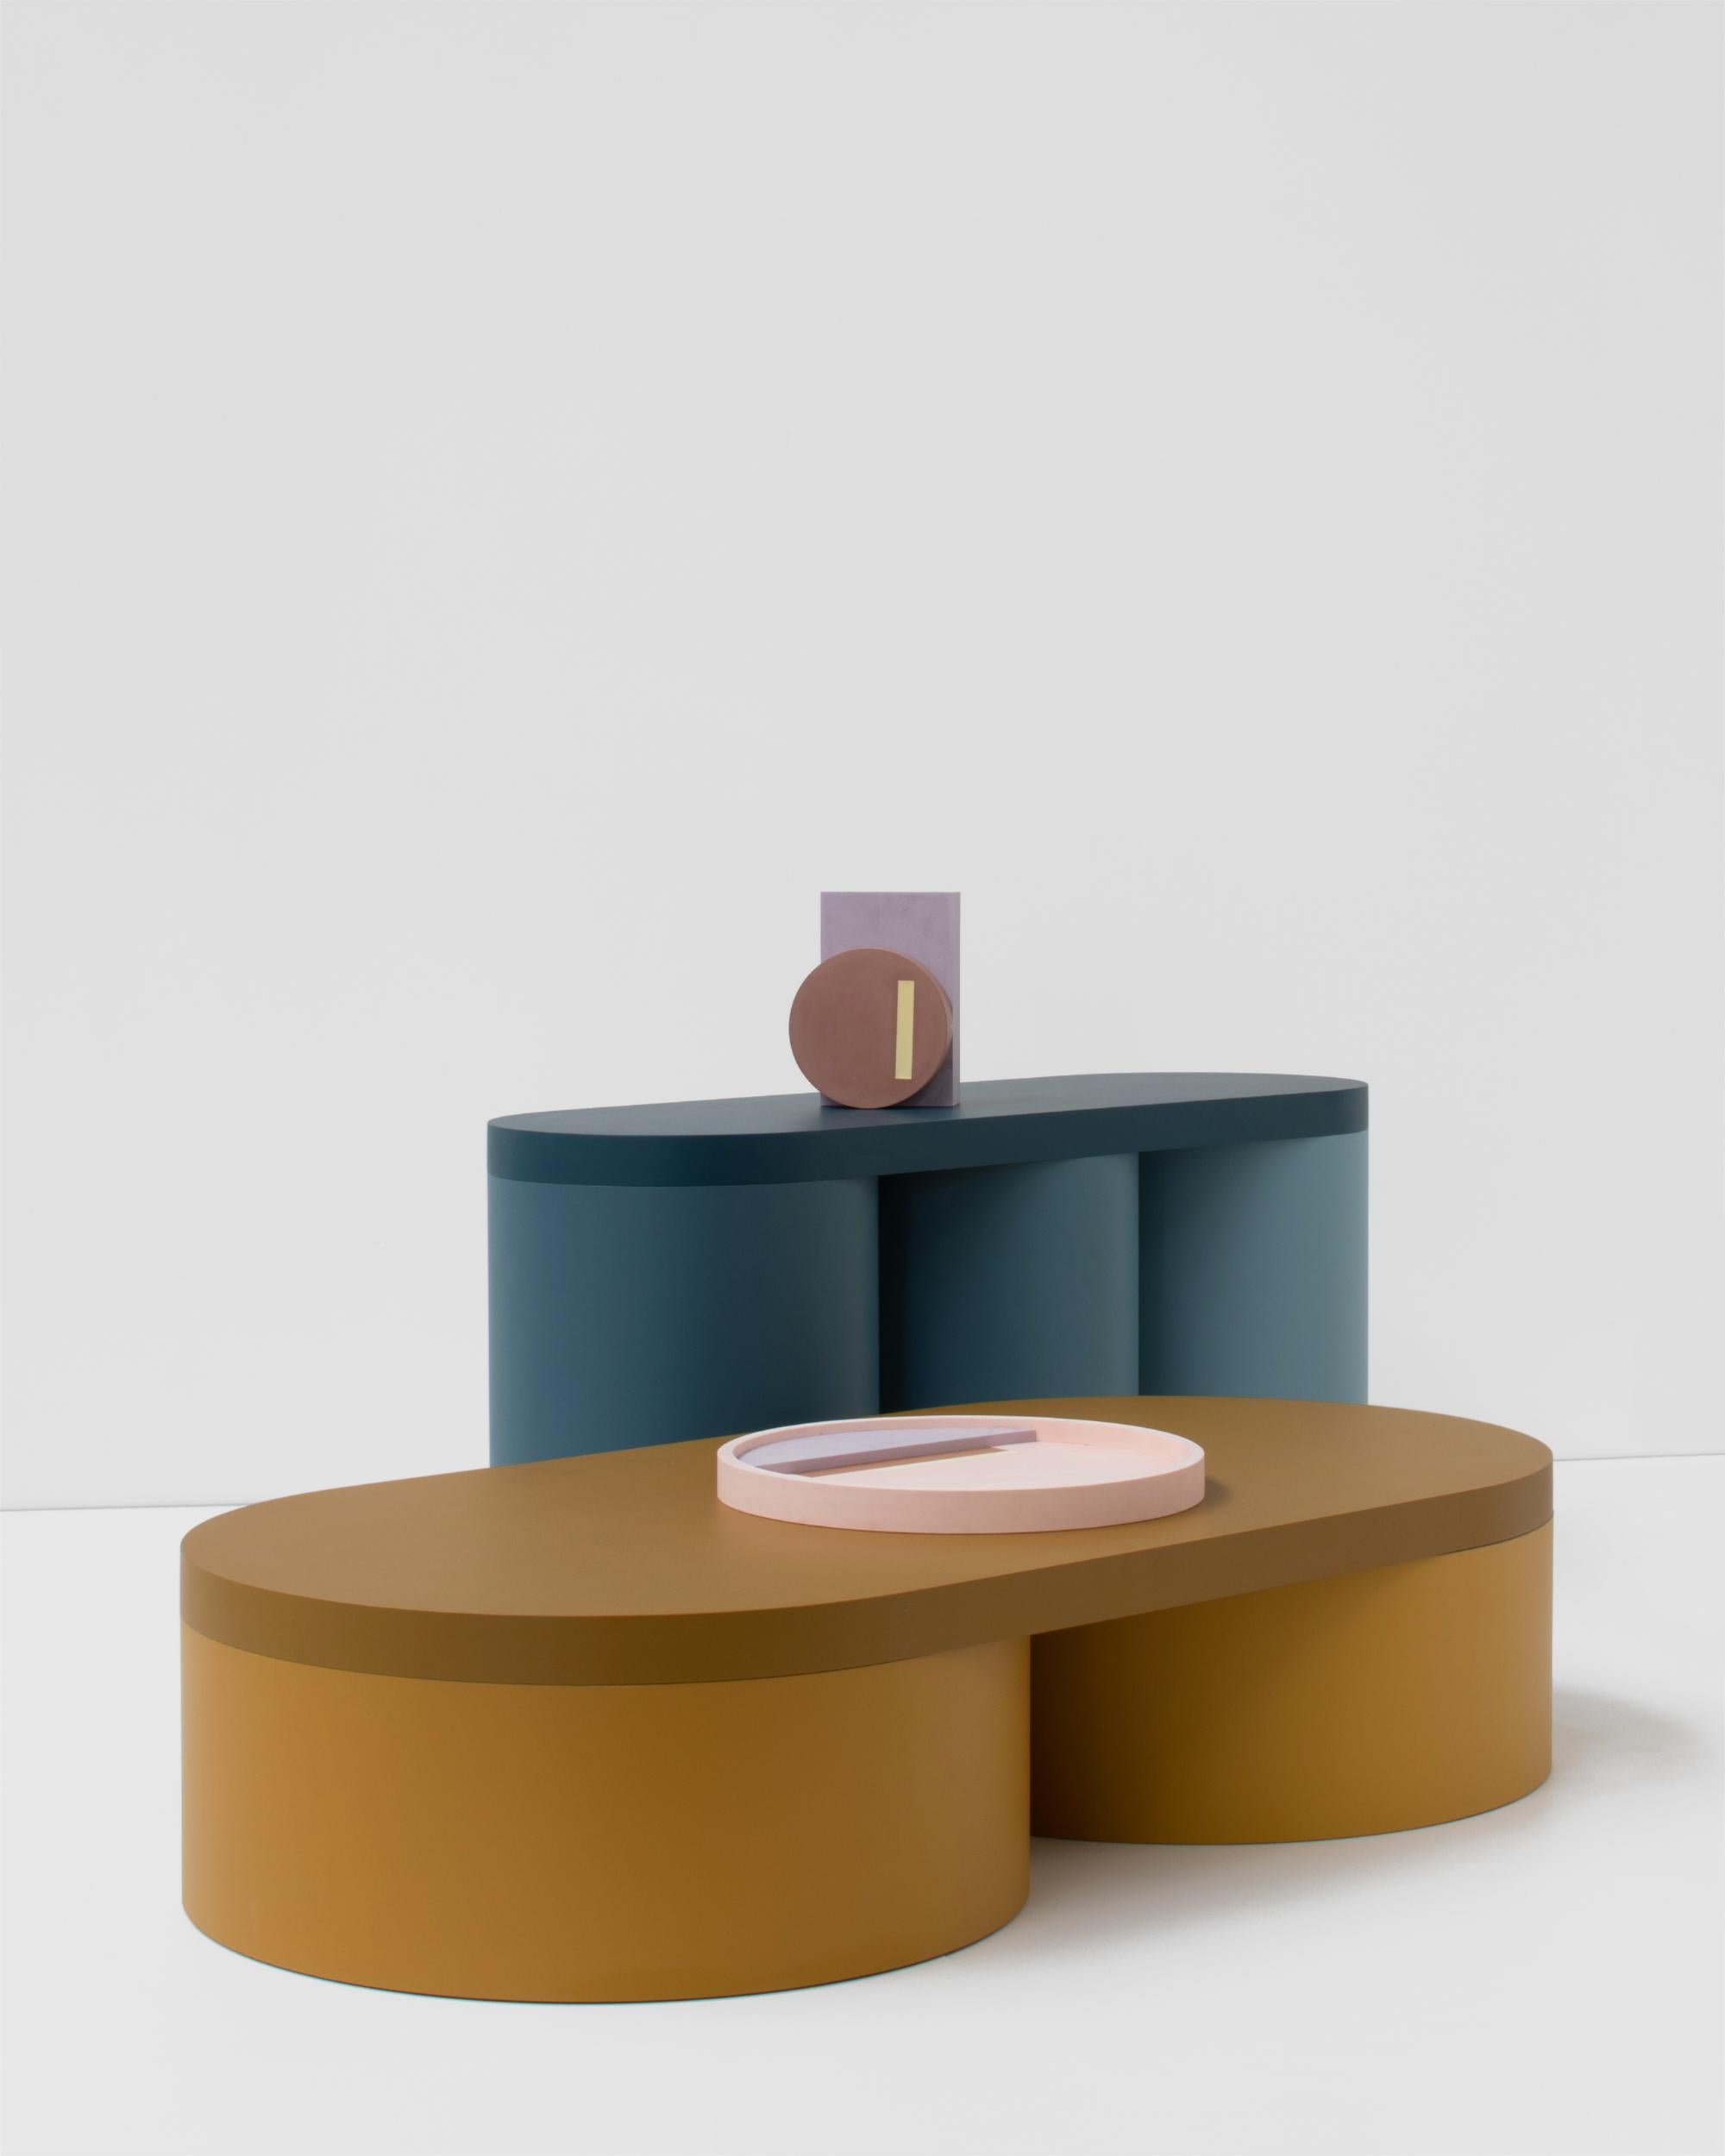 Colorful low table with a contemporary design. 

Carefully handmade in our atelier. Manufactured in an artisanal way, in which every step of the process is carefully executed

The base of this low table consists of 1 hollow cylinder. It's topped